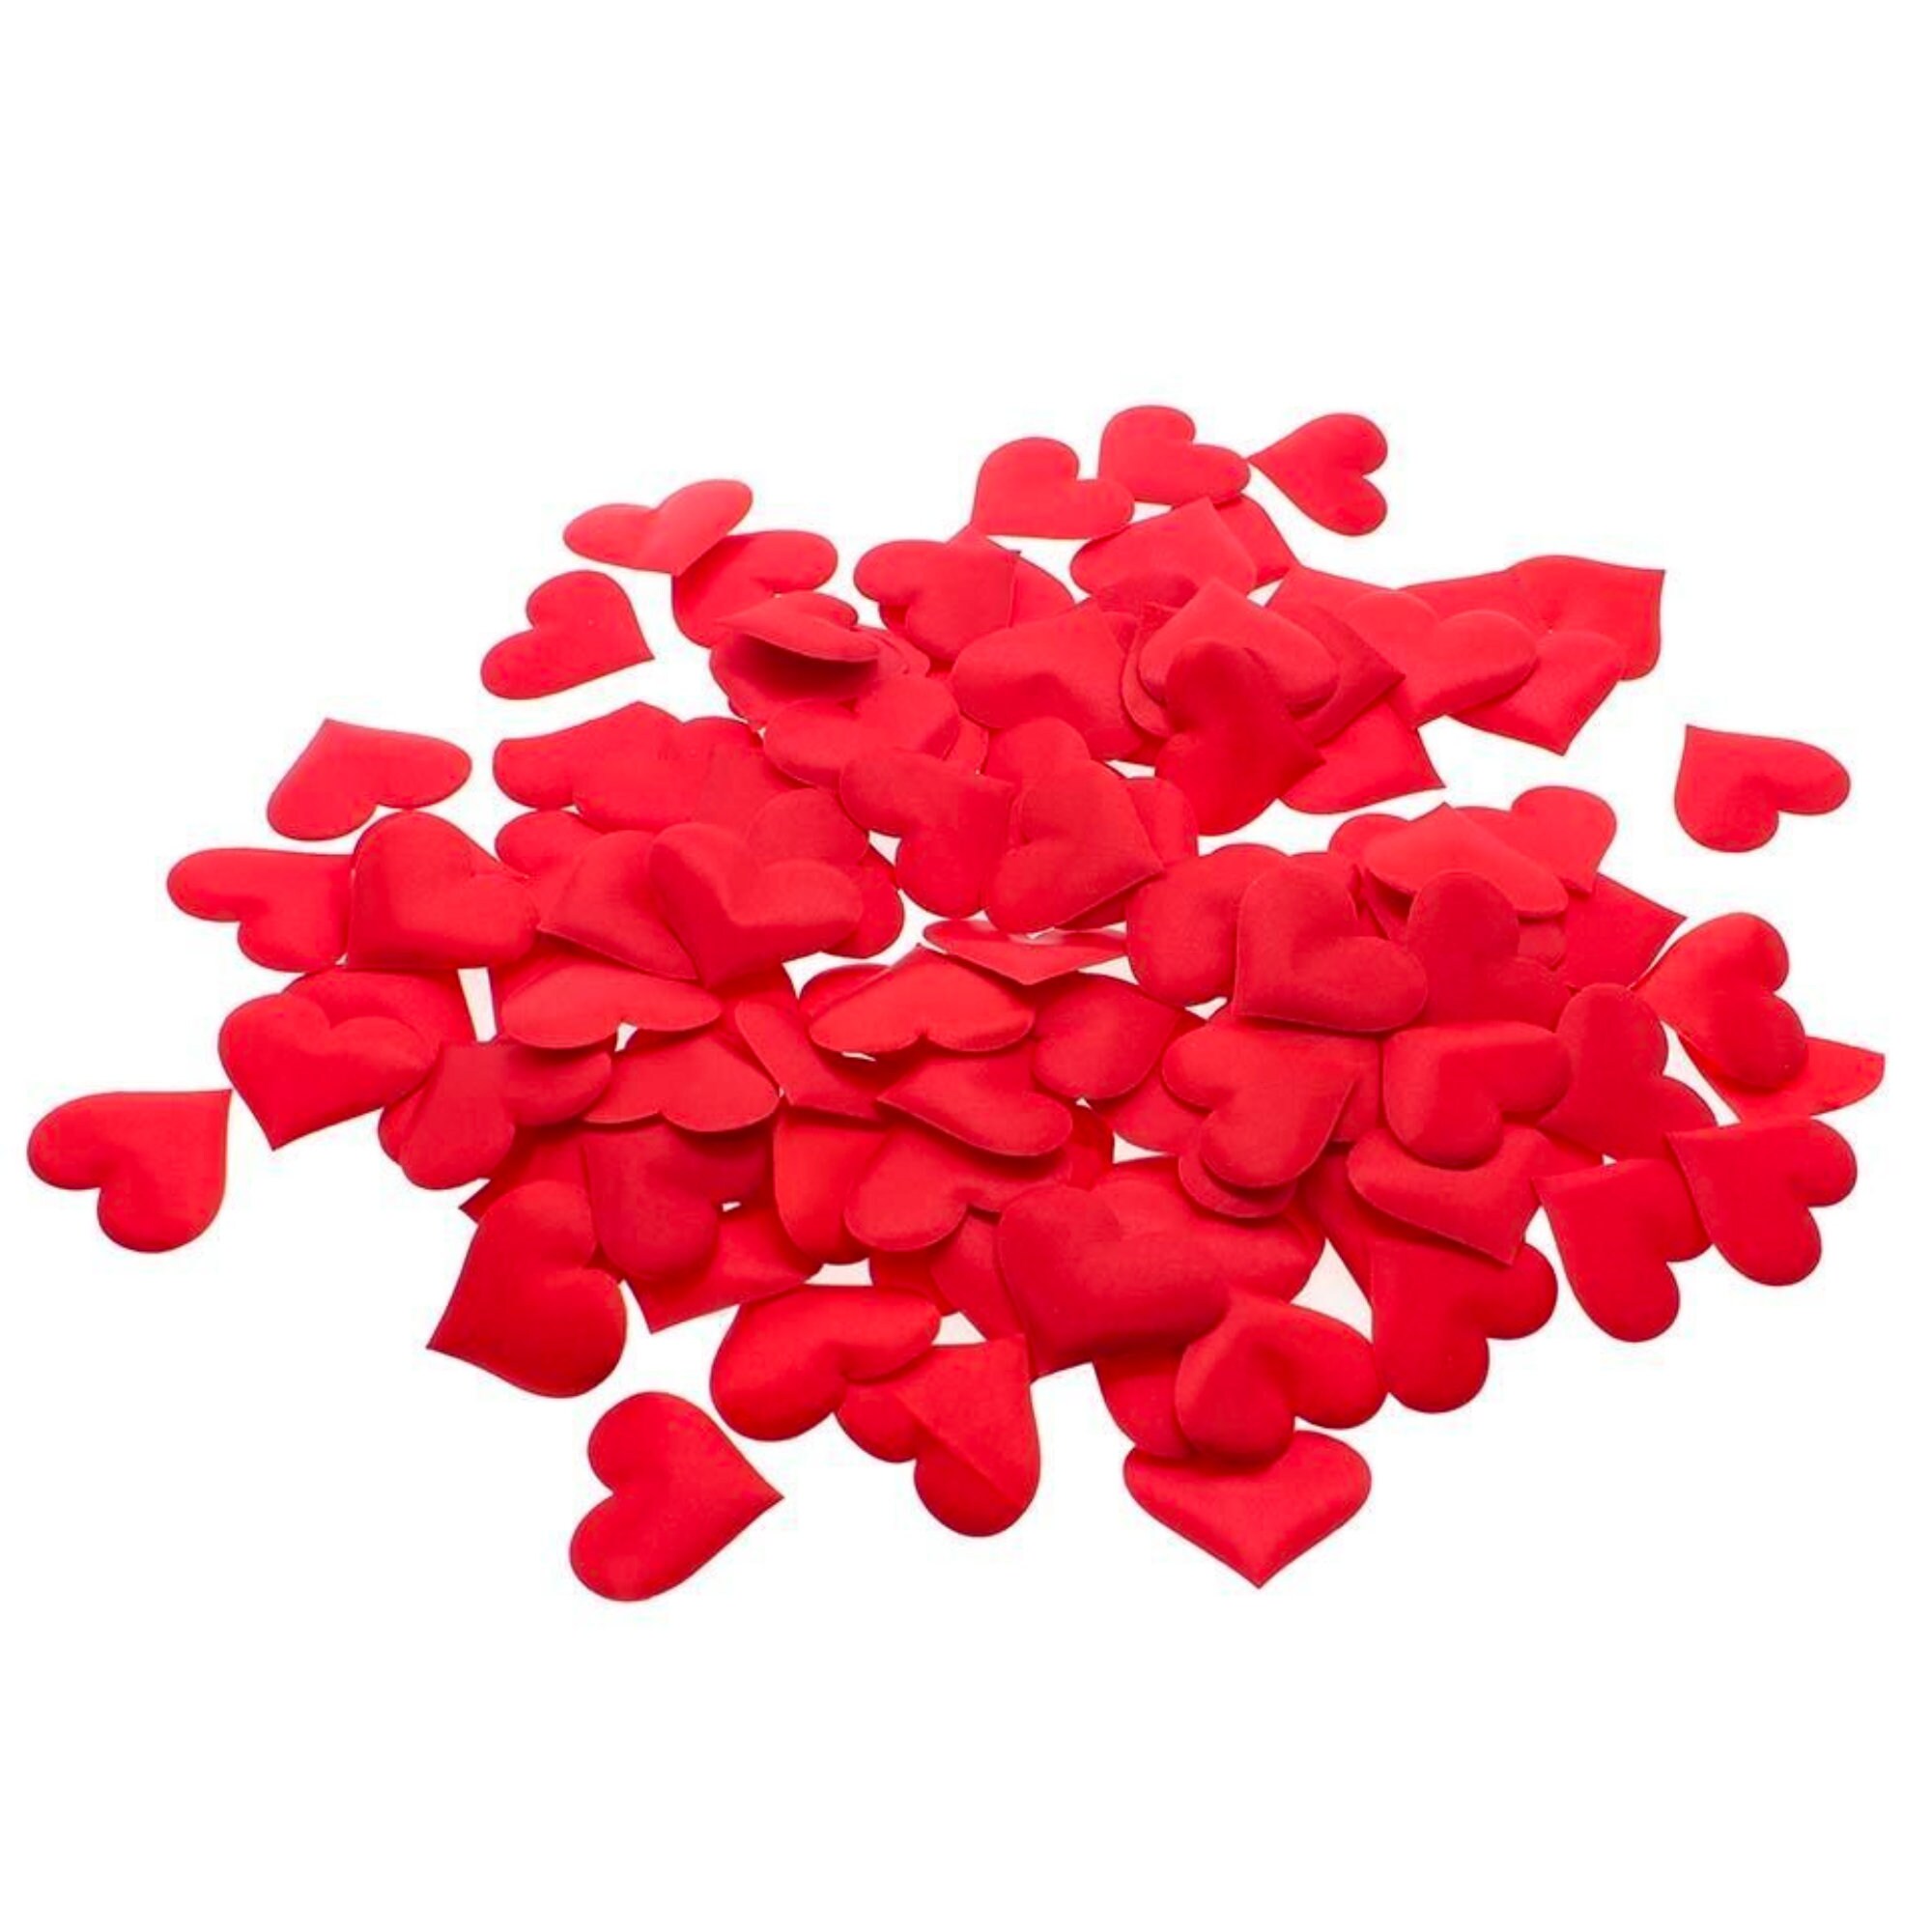 100 Small Satiny Fabric Hearts 7/8" Bed Confetti Decorations #11 Table 22mm 